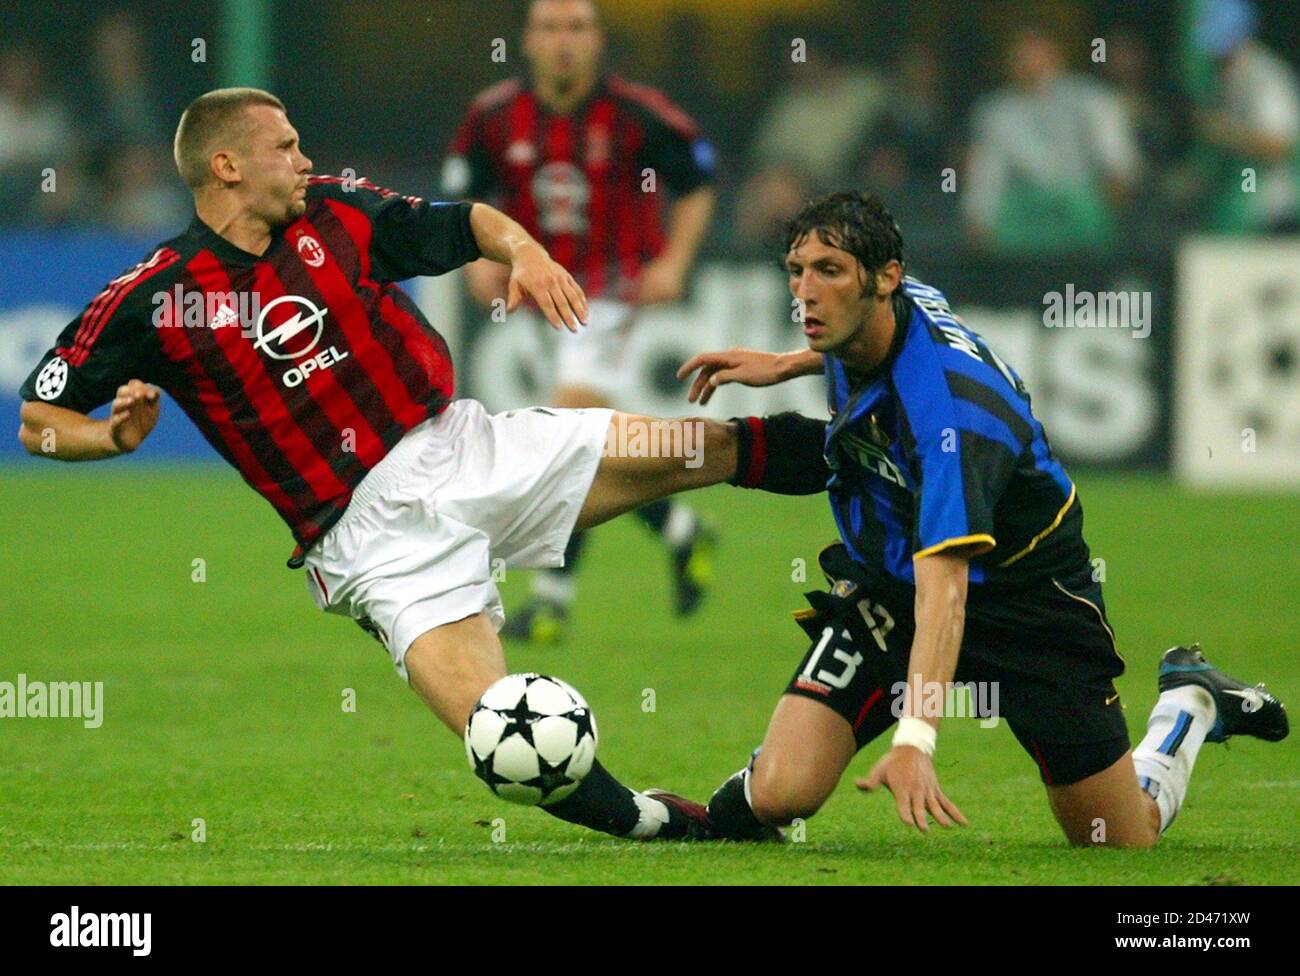 AC Milan's Andriy Shevchenko (L) challenges Marco Materazzi of Inter Milan  during their Champions League semi-final first leg clash at the San Siro  Stadium in Milan May 7, 2003. The match ended